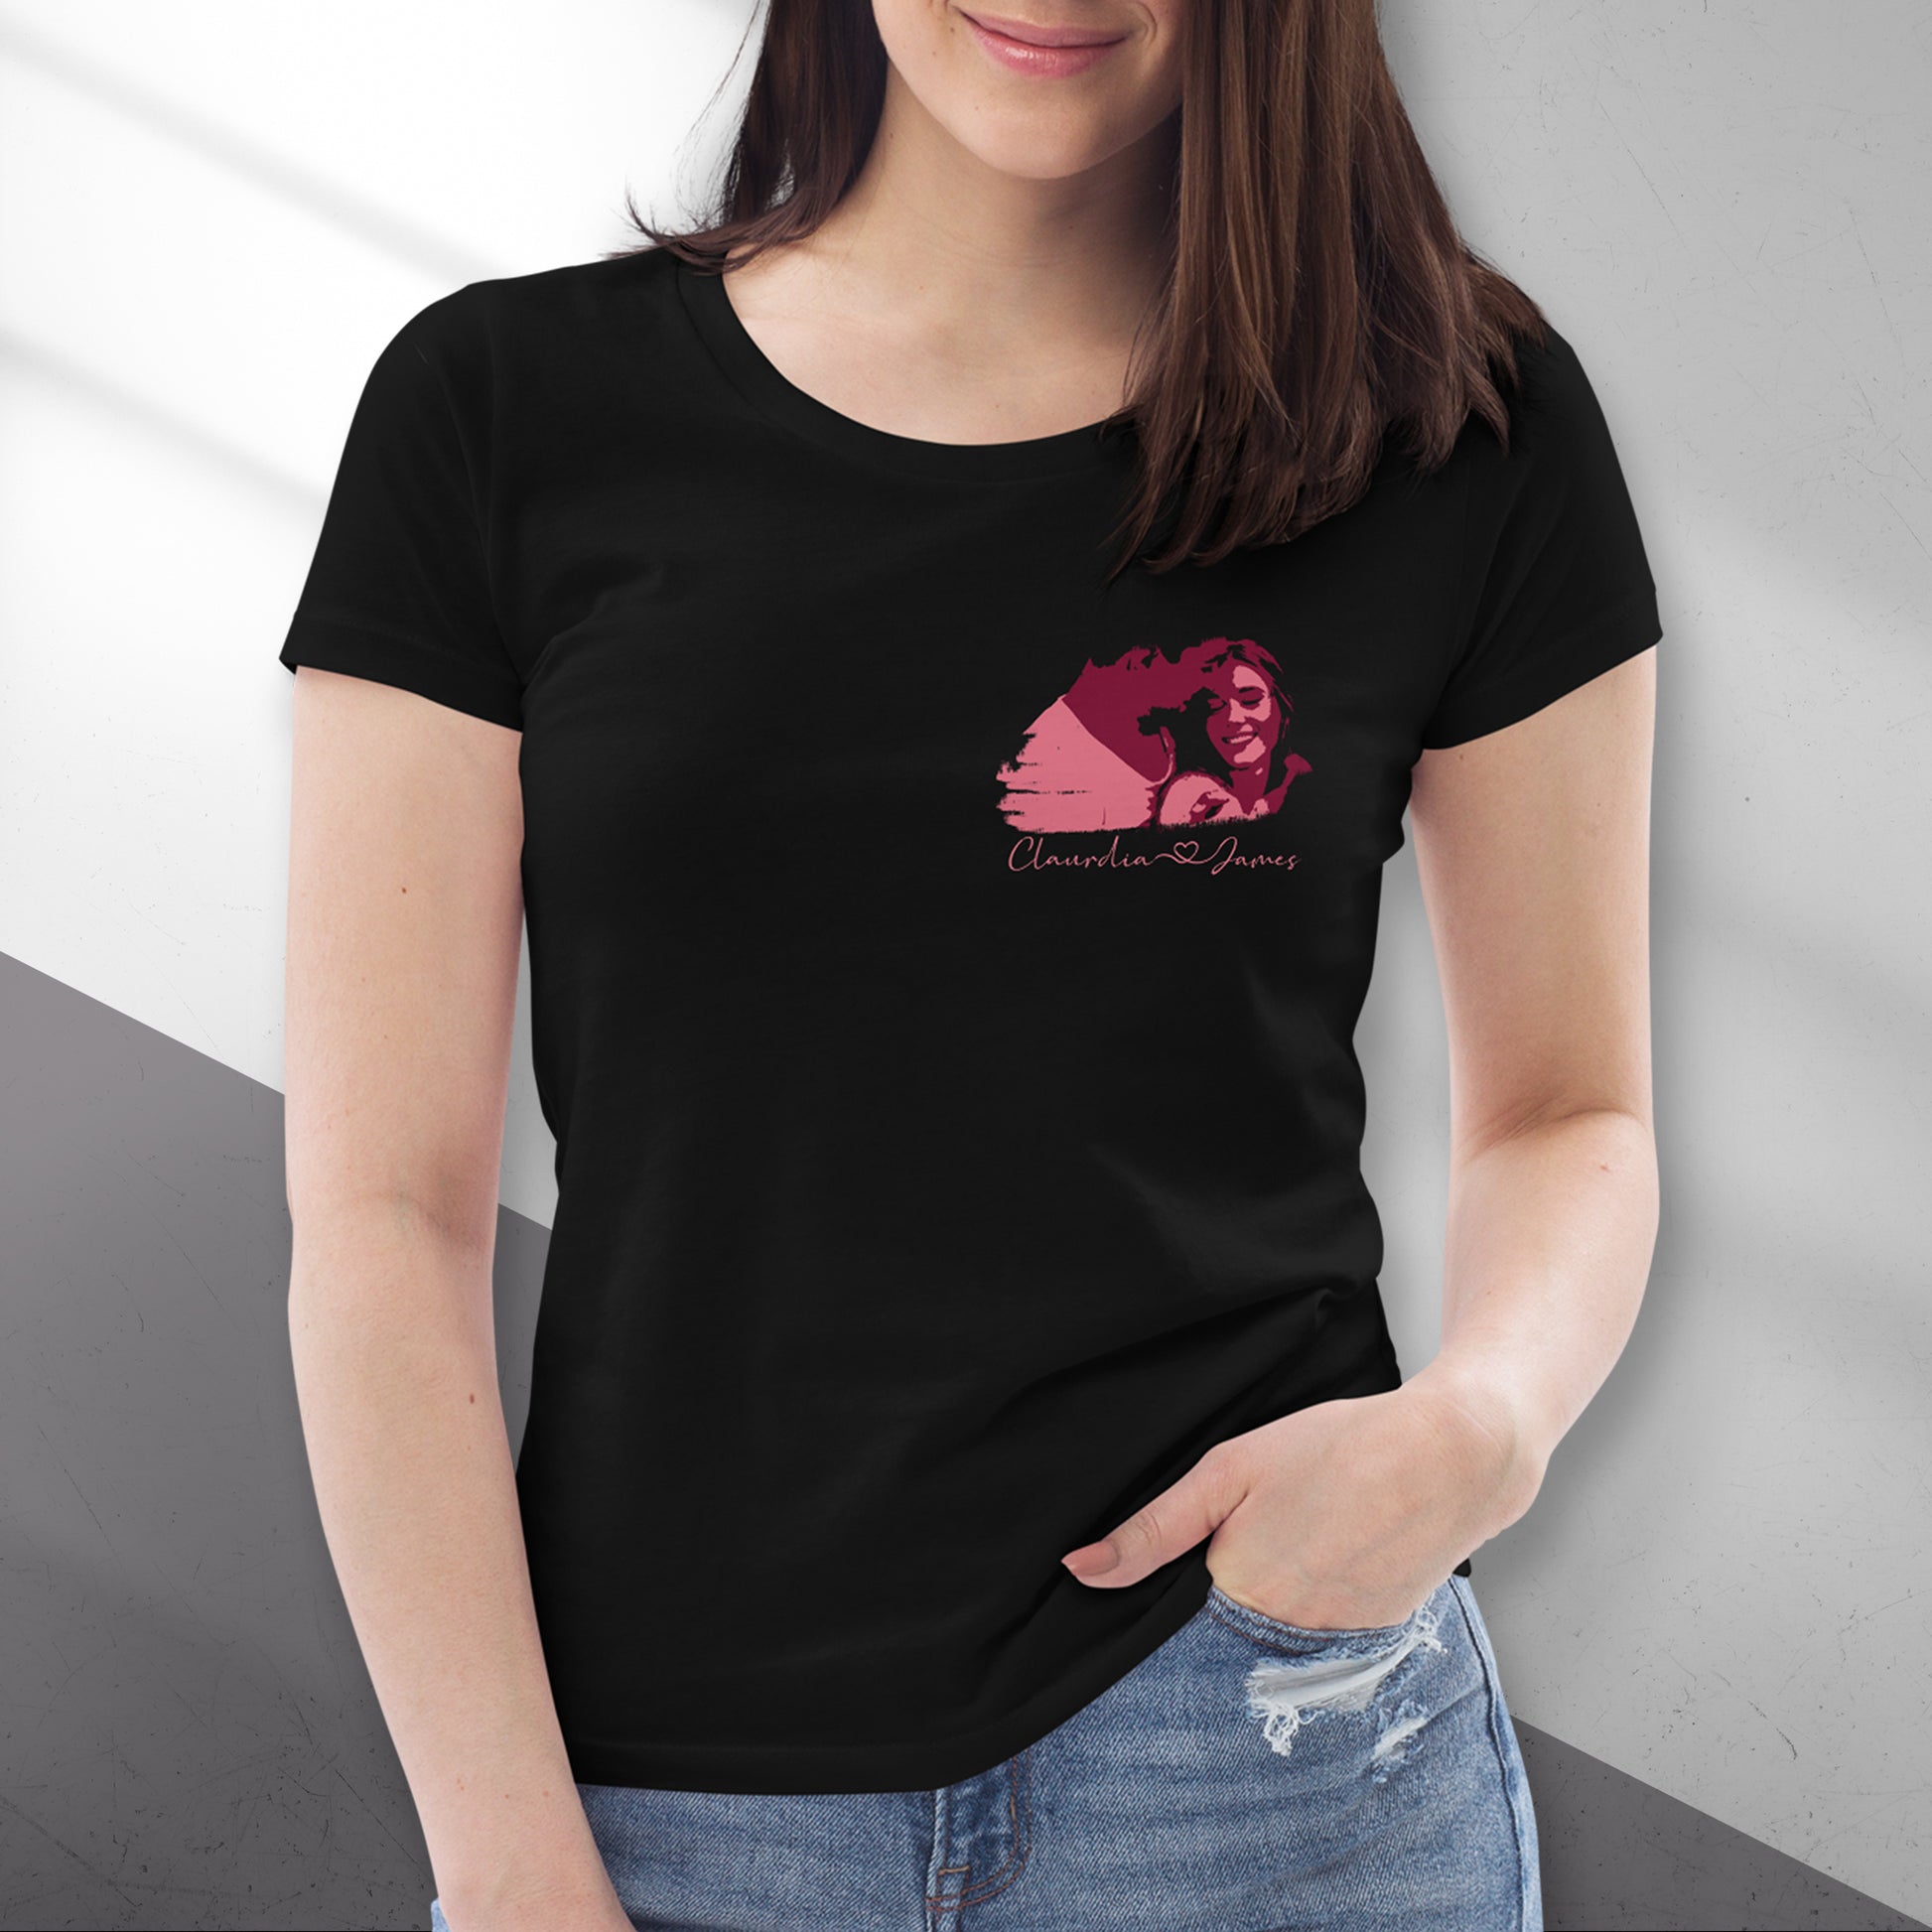 Personalized Women's T-Shirt -Small Portrait in Red | Seepu 